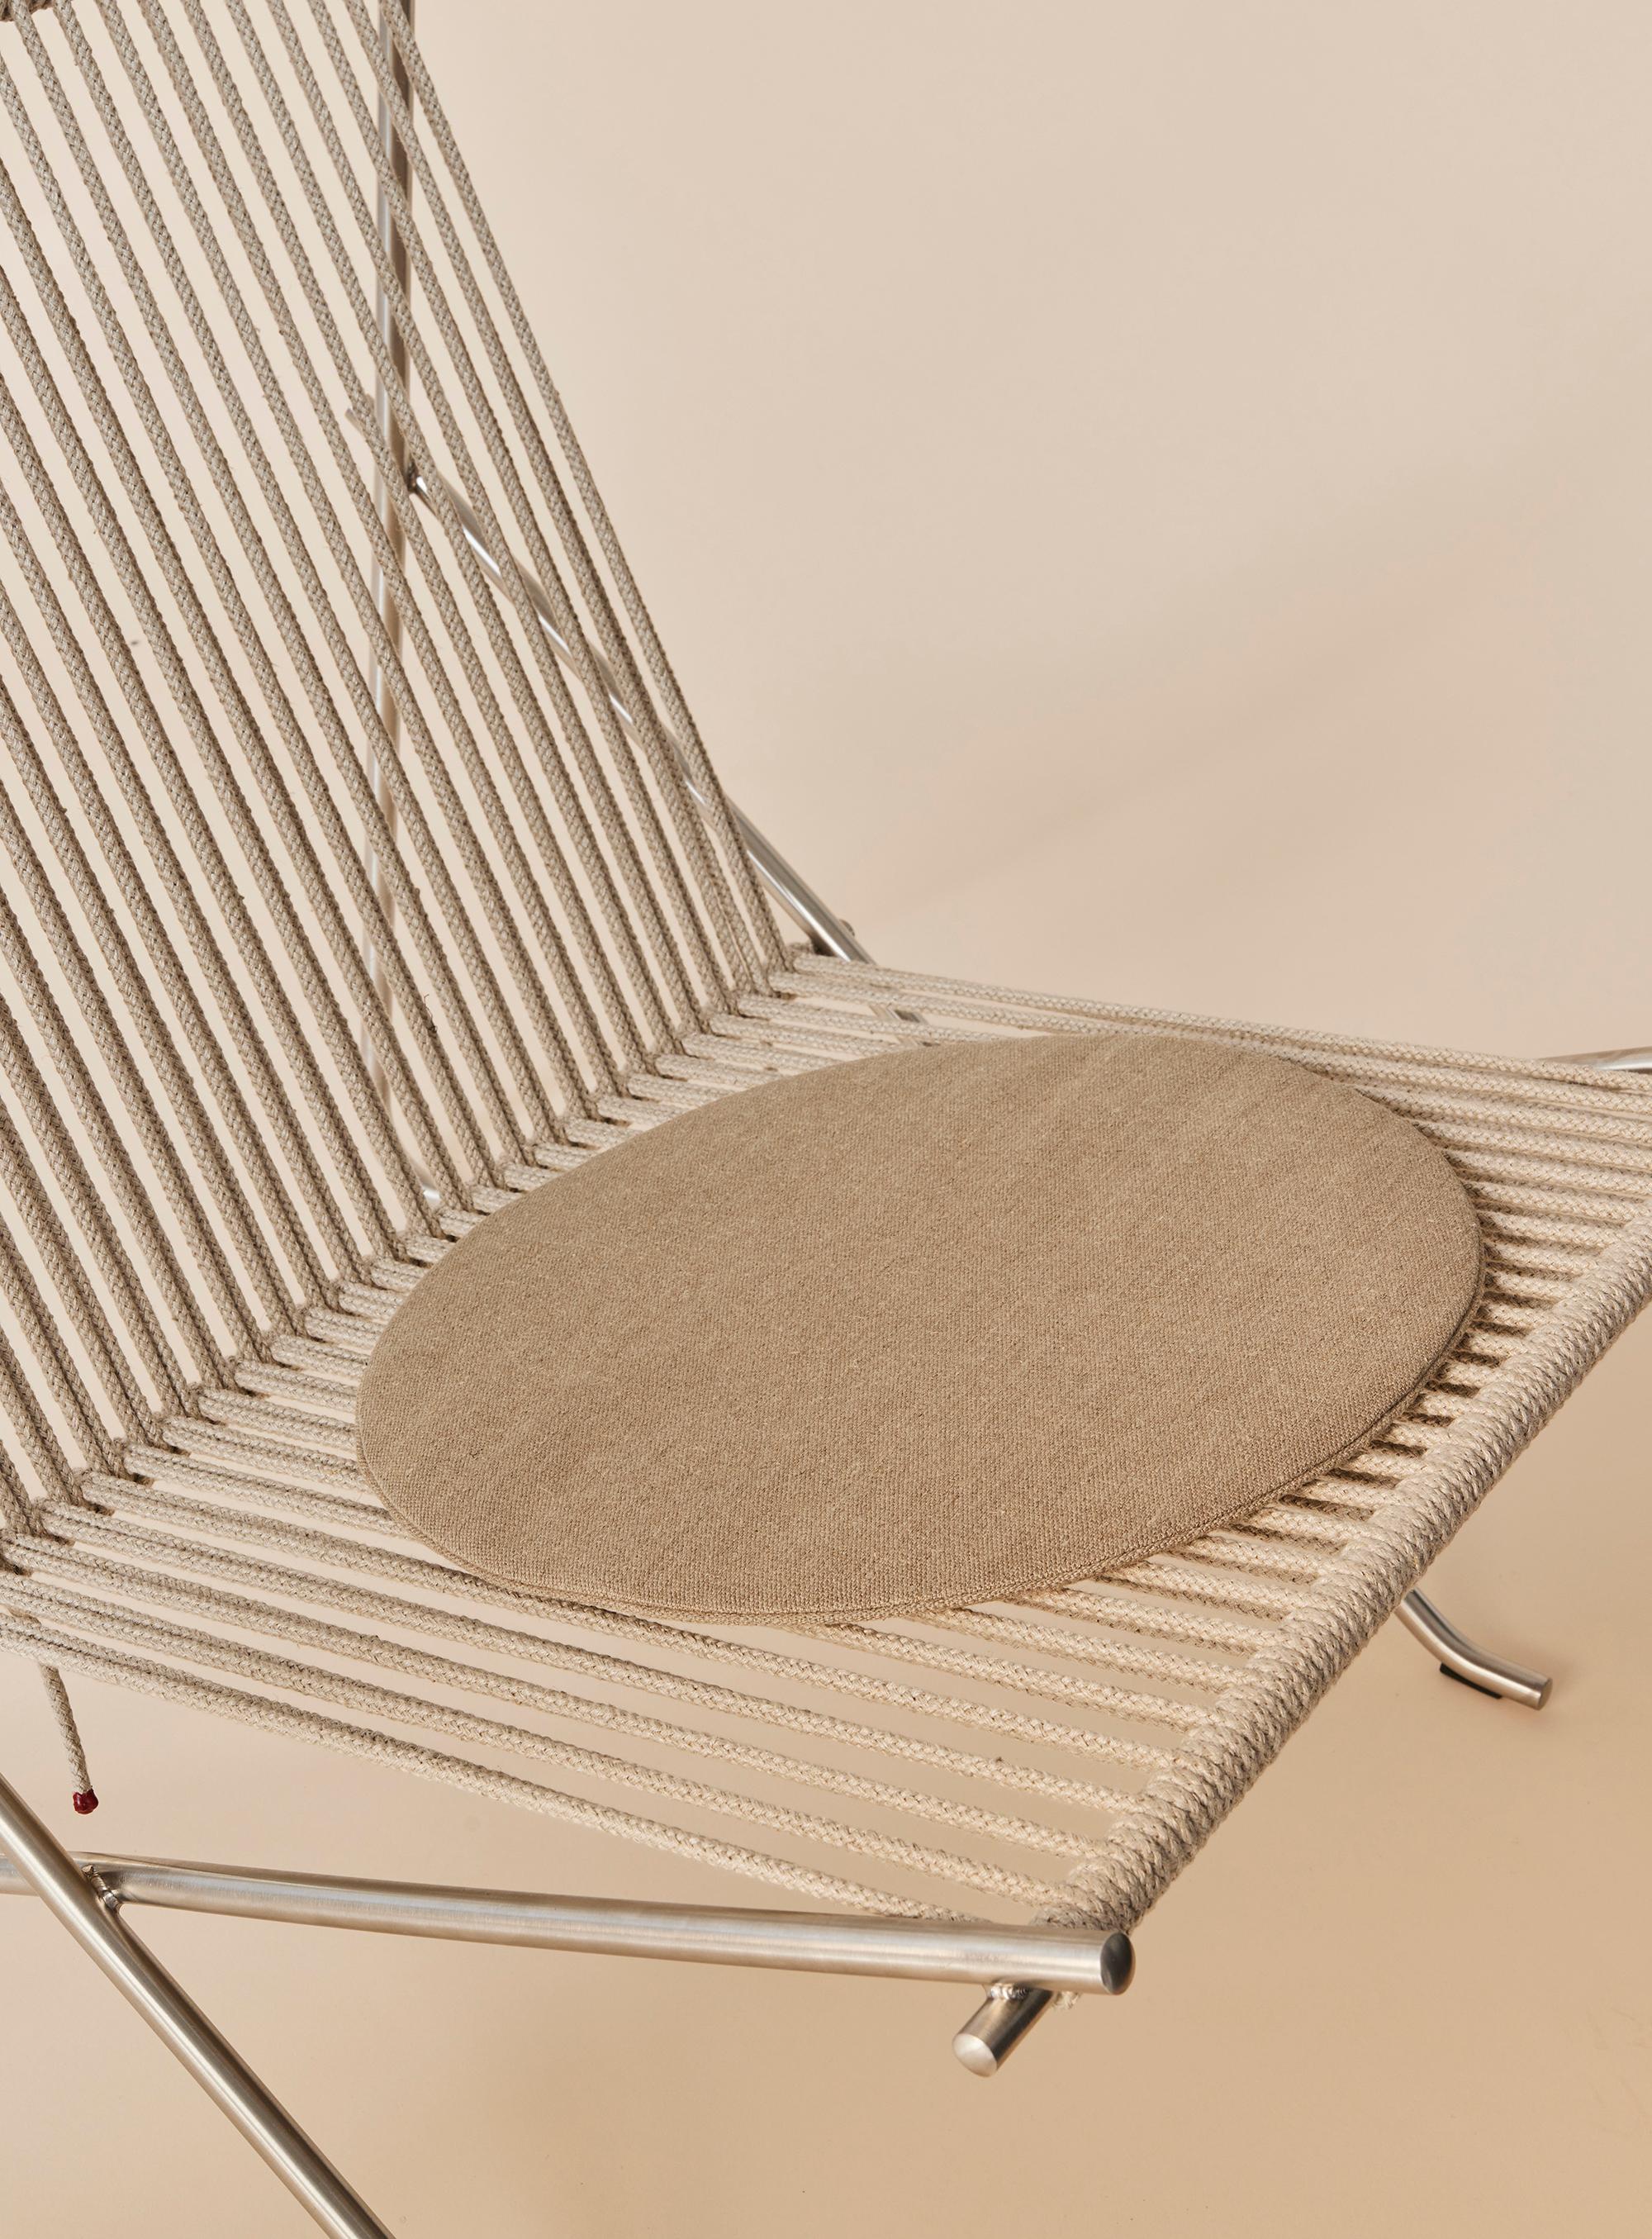 'PK4' Lounge Chair for Fritz Hansen in Natural Flag Halyard with Black Frame For Sale 10